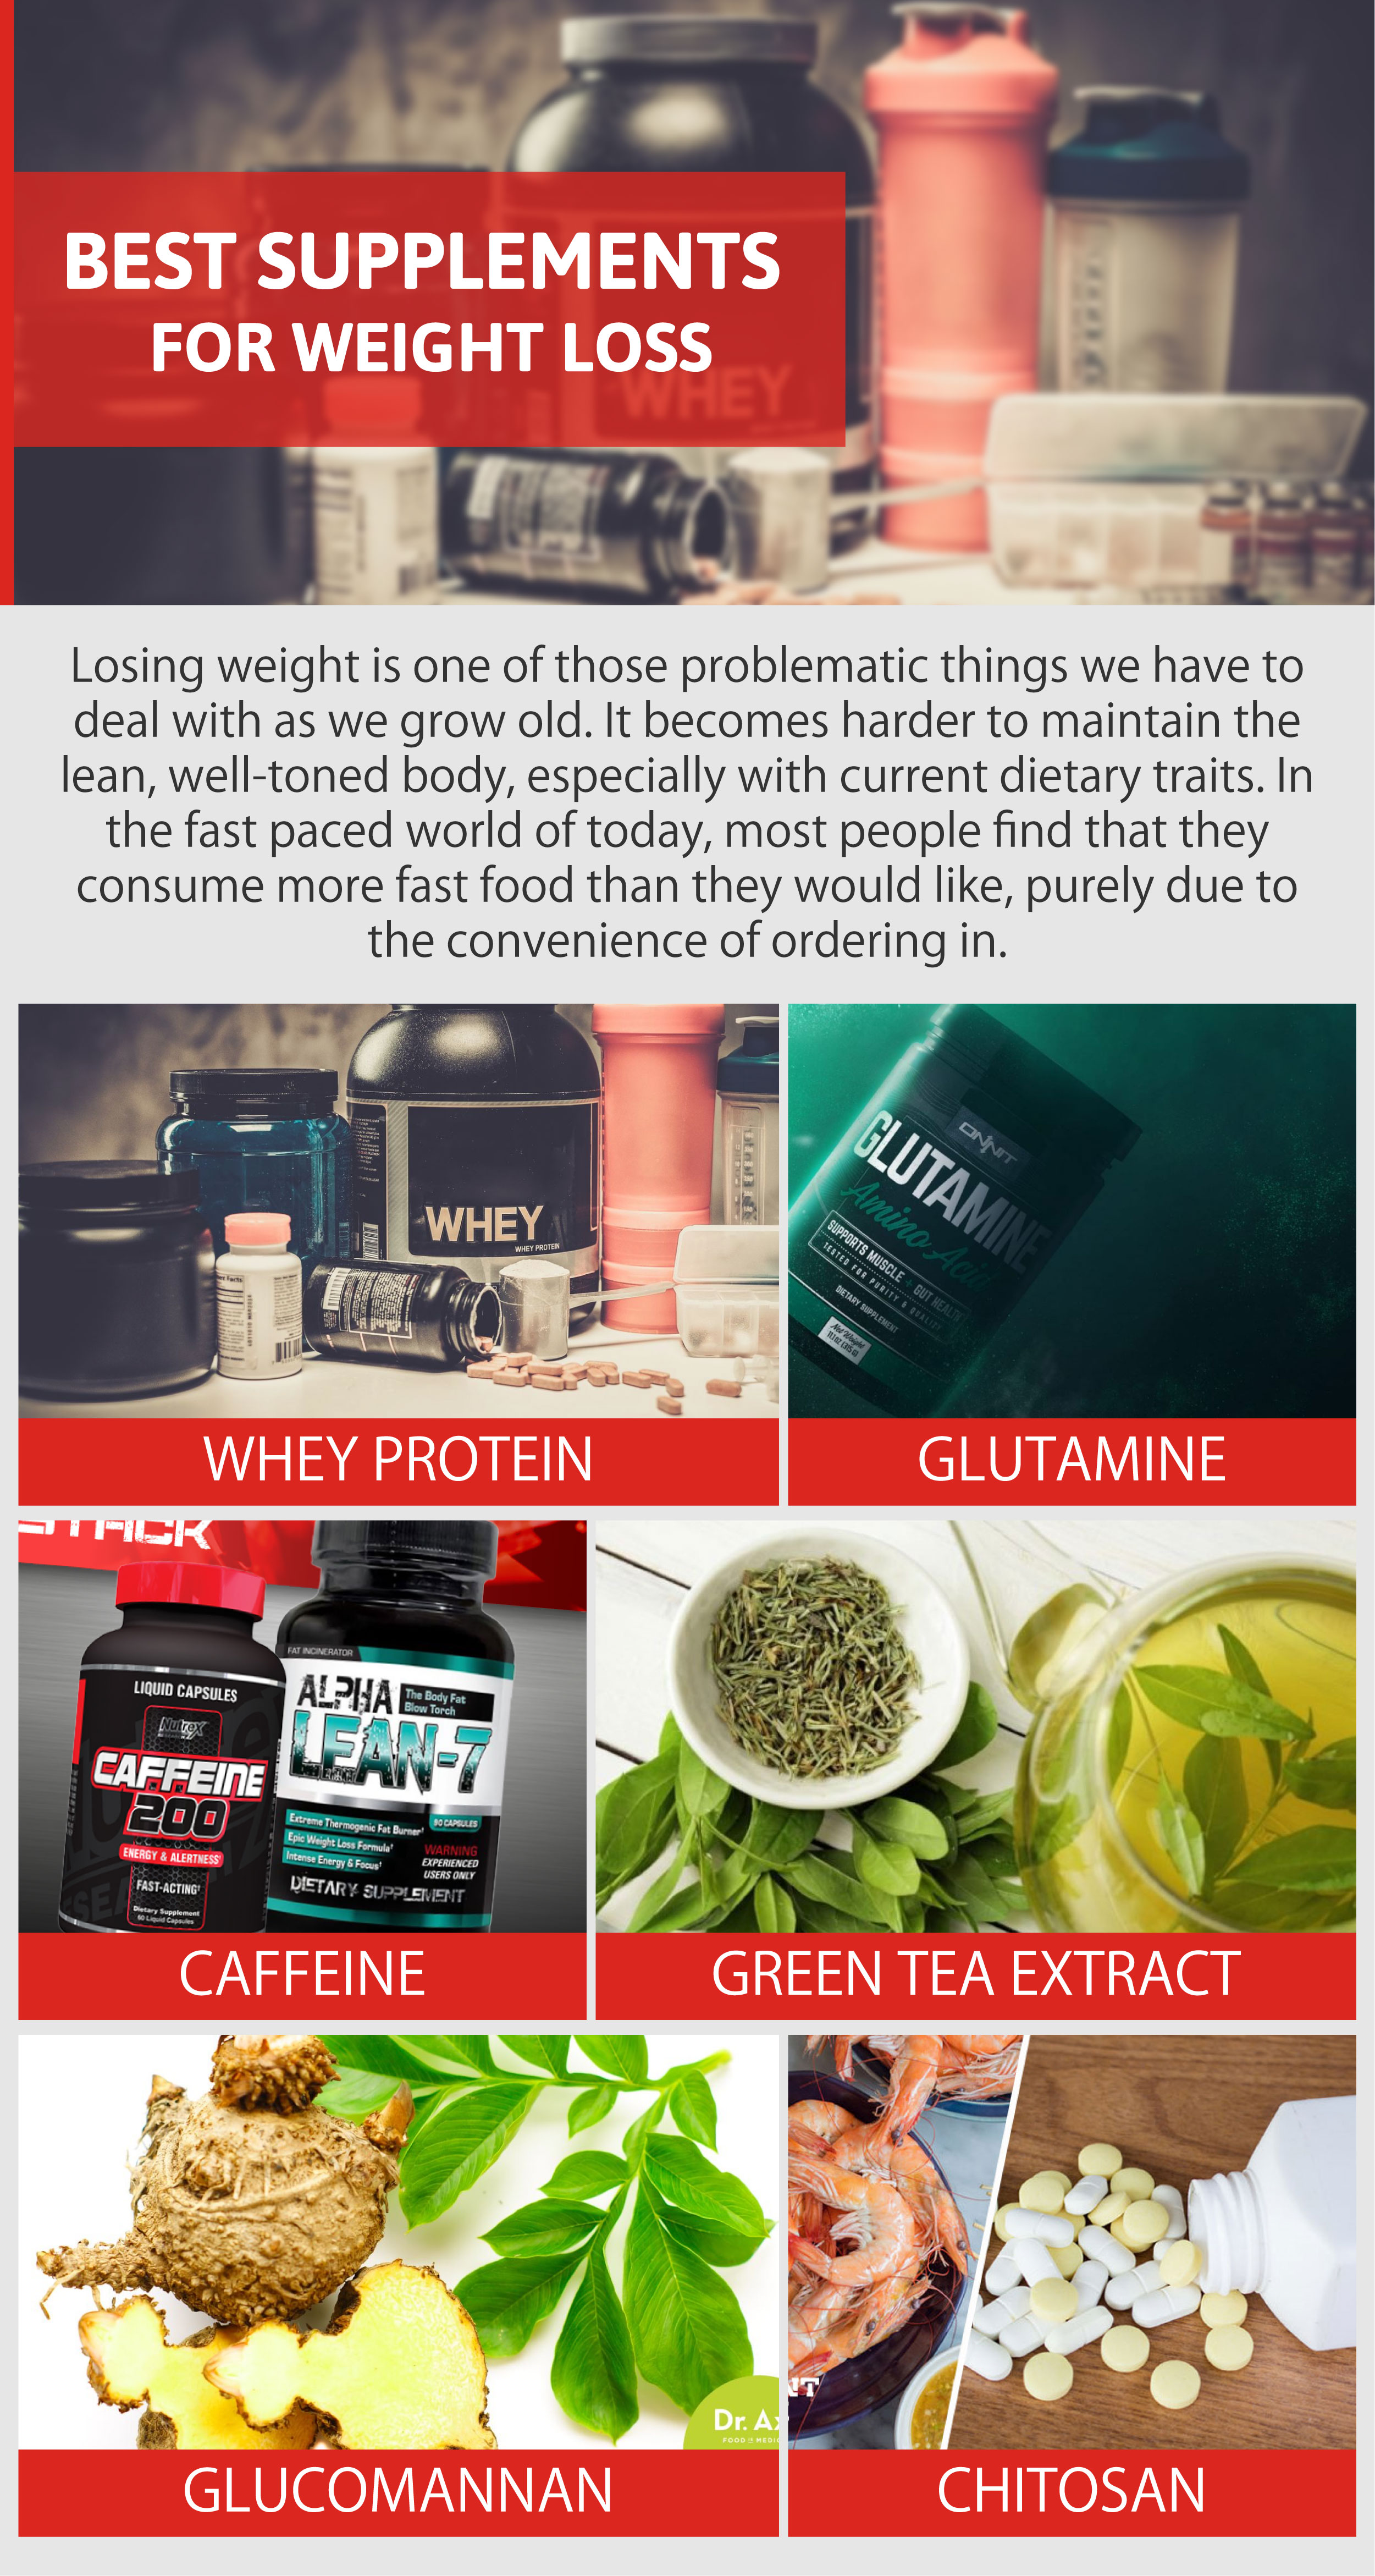 Best Supplements for Weight Loss